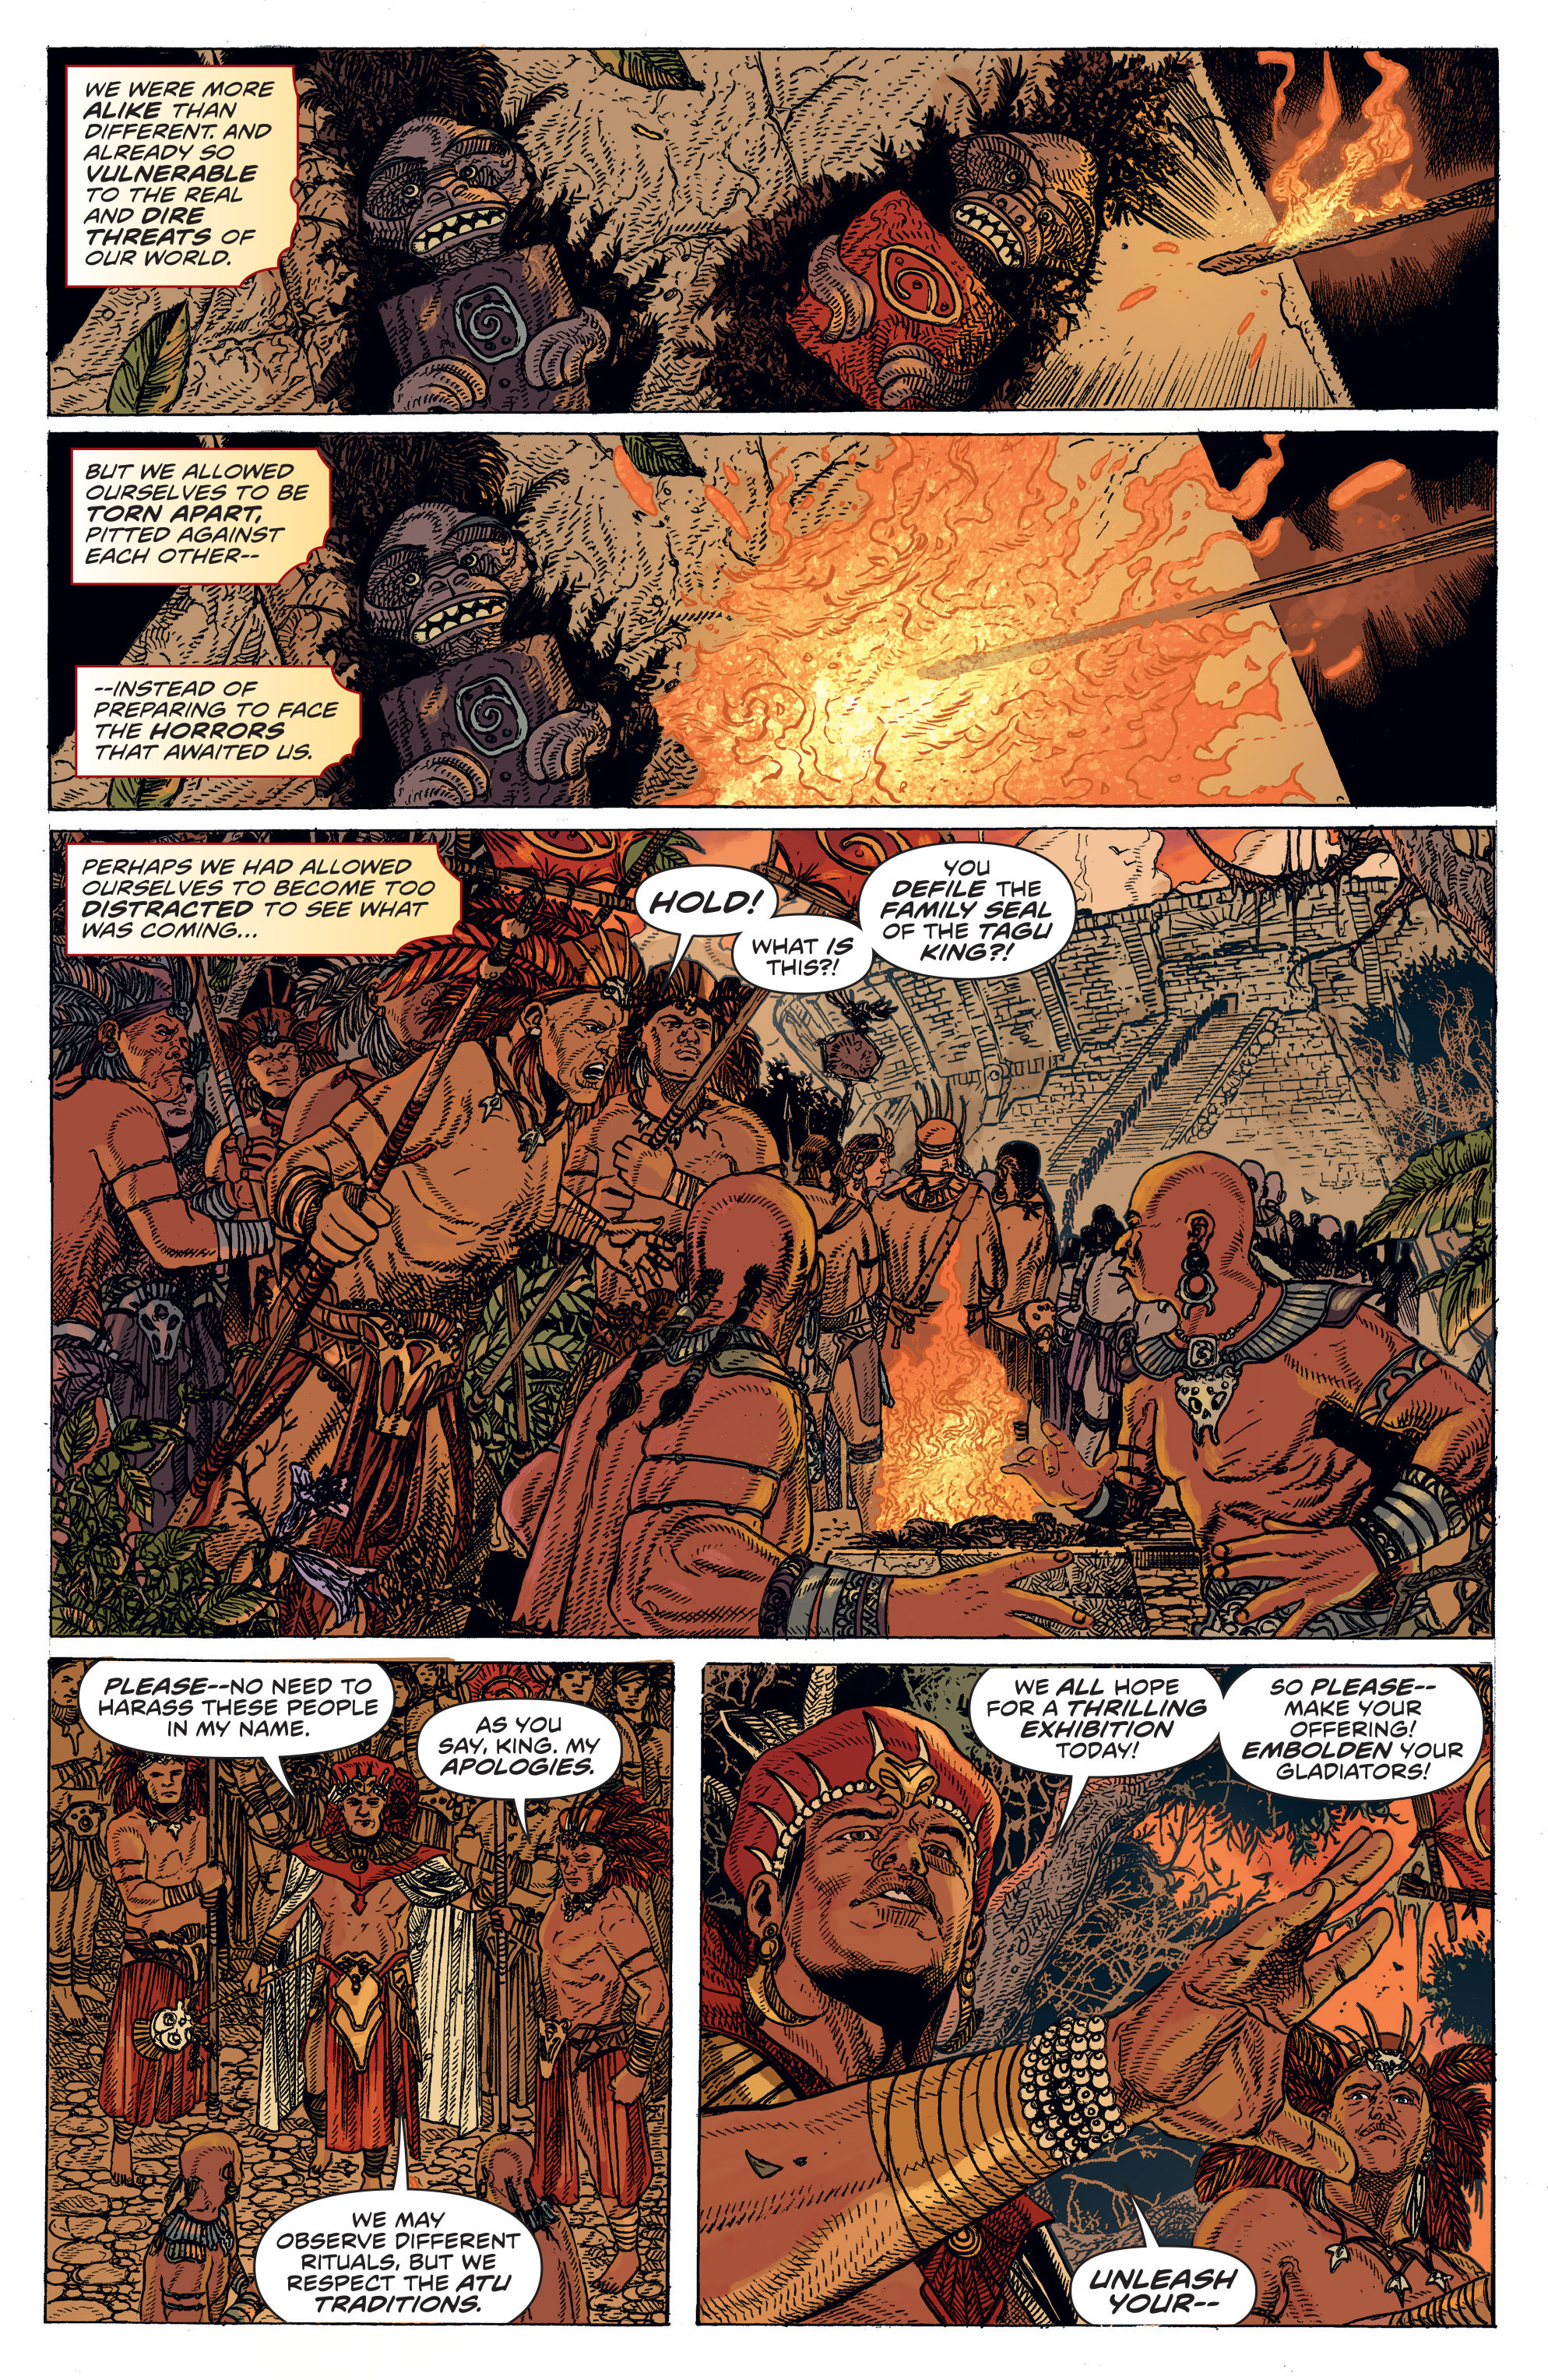 Kong of Skull Island (2016-): Chapter 1 - Page 3